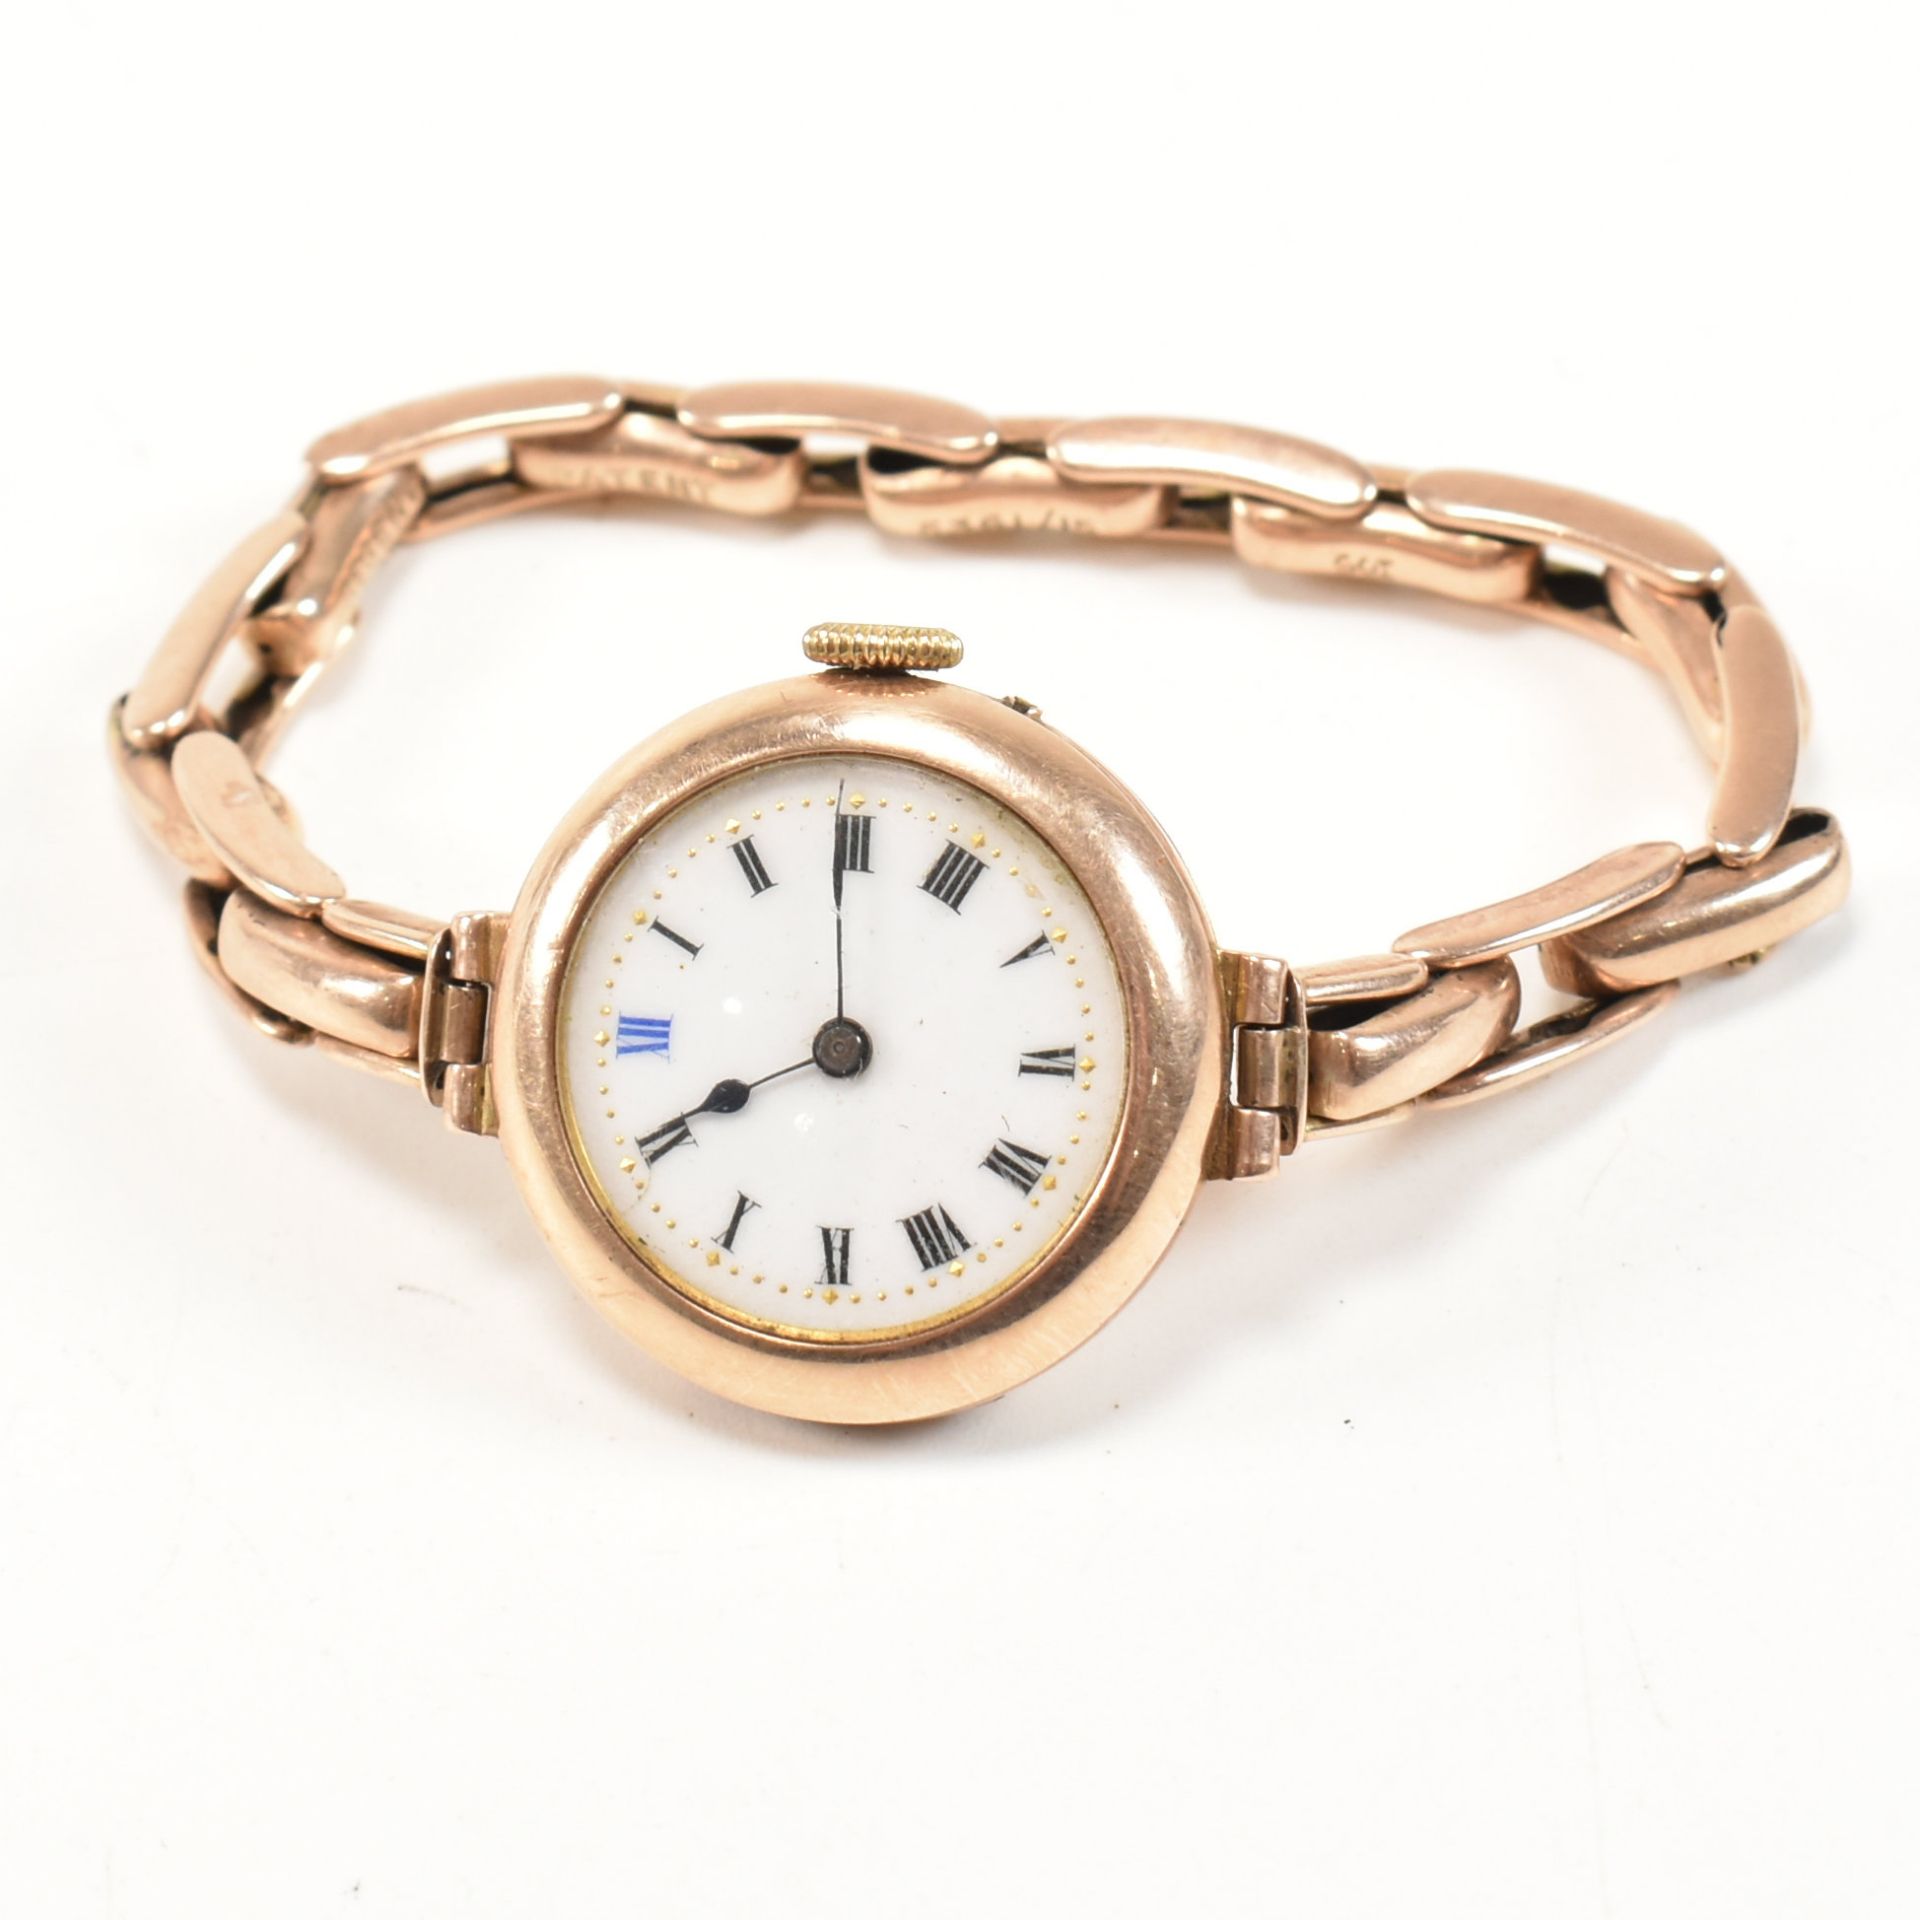 EARLY 20TH CENTURY 9CT GOLD LADIES DRESS WRISTWATCH - Image 2 of 7